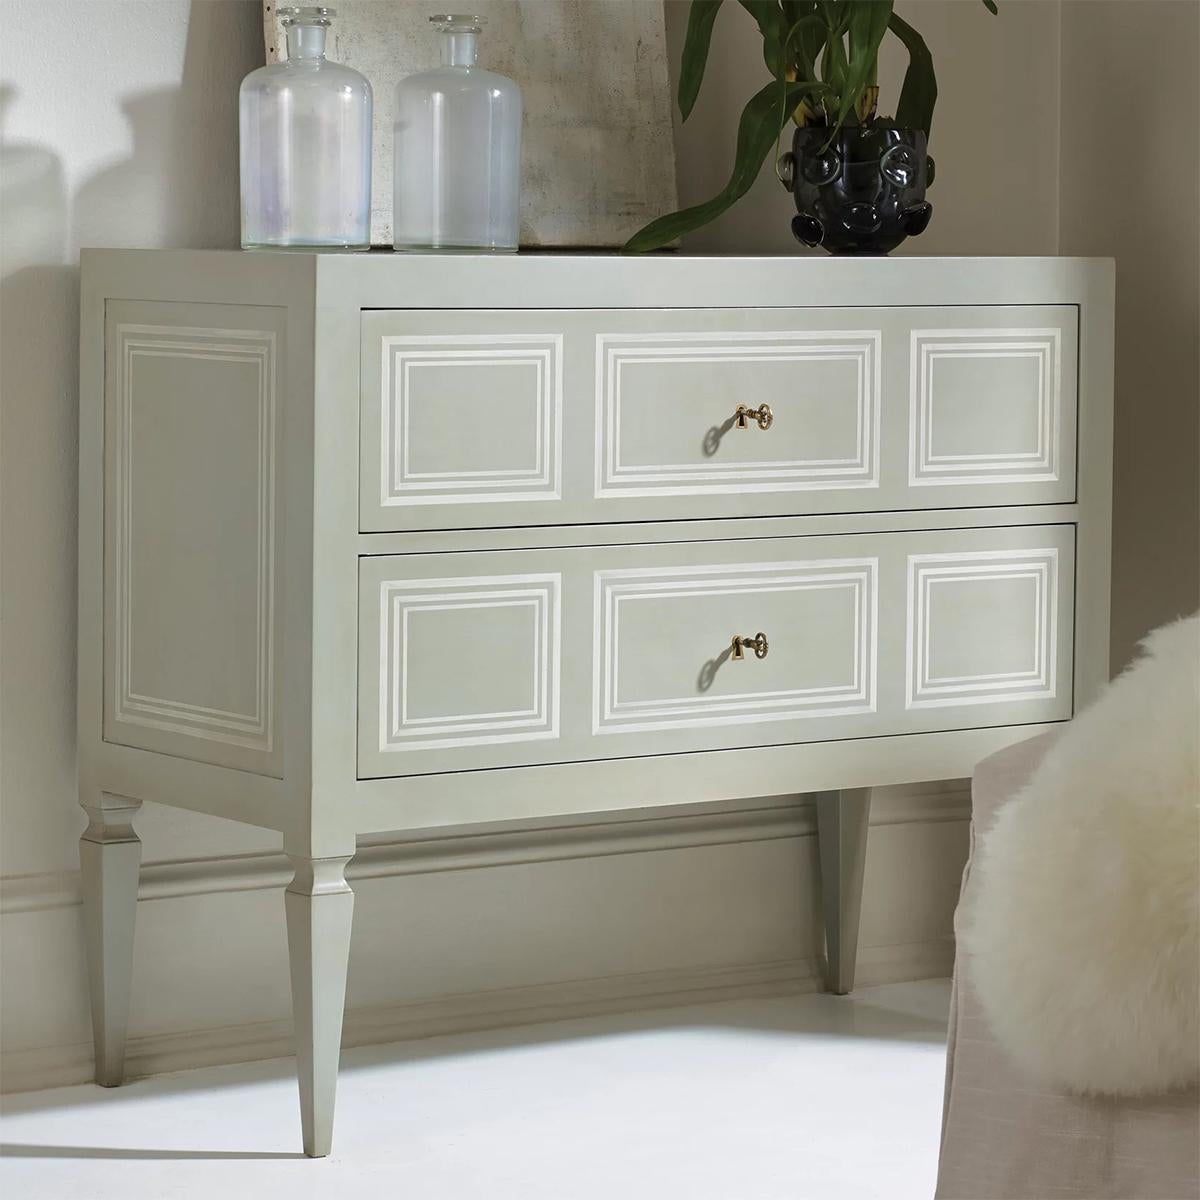 Northern Italian Neo Classic Painted Commode with a grey painted finish and ivory accents, this hand-painted two drawer commode has a simple modern look and roots in Northern Italy in the 19th century.
Two long drawers with antique key pulls raised